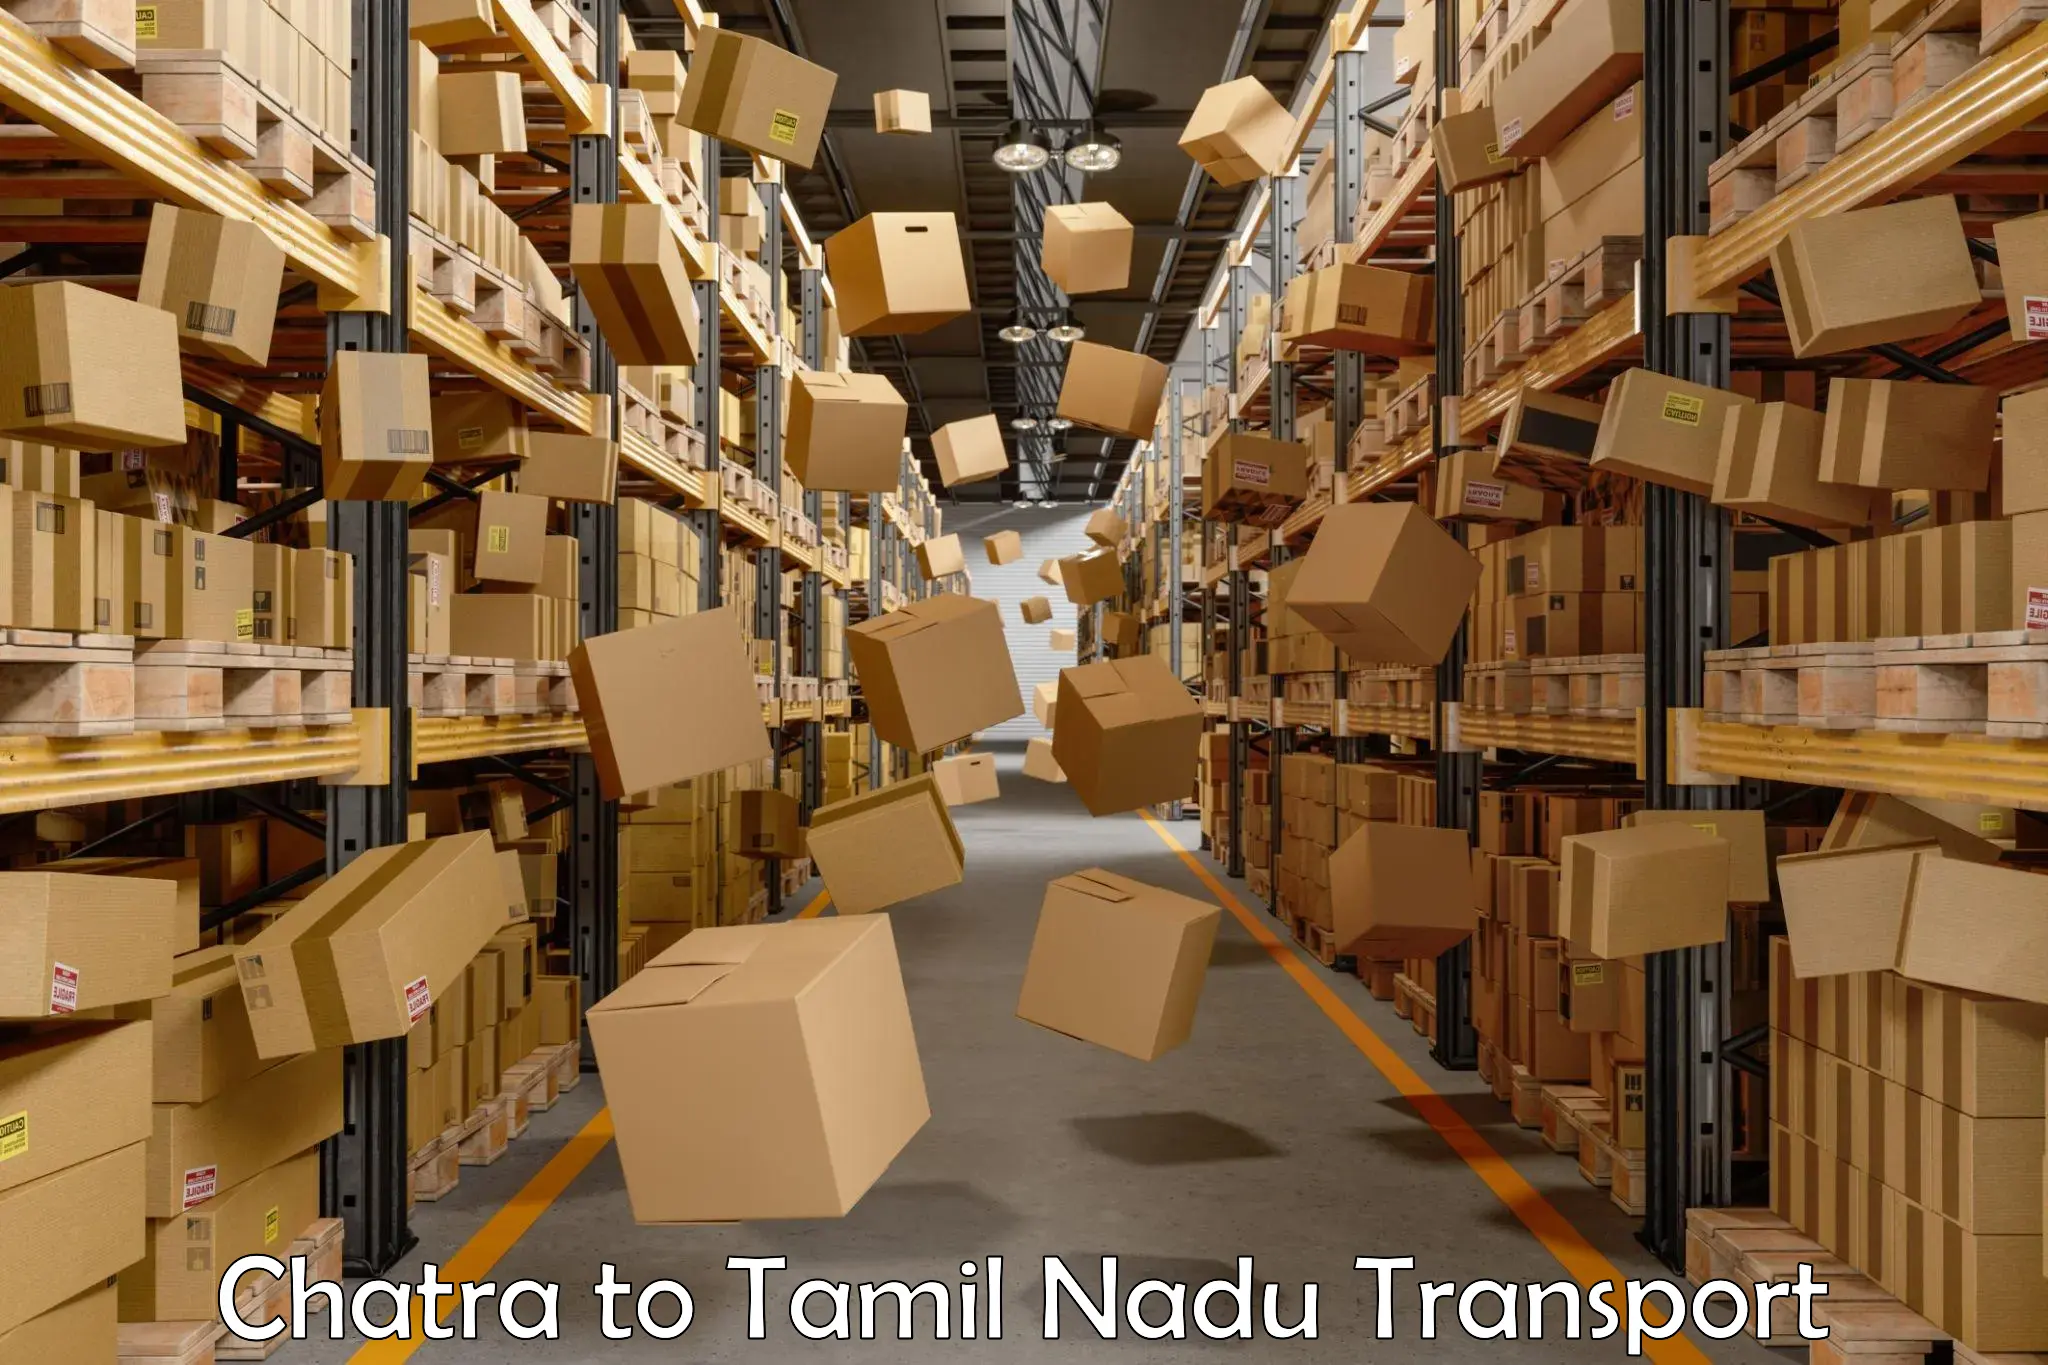 Cargo transport services Chatra to Saveetha Institute of Medical and Technical Sciences Chennai